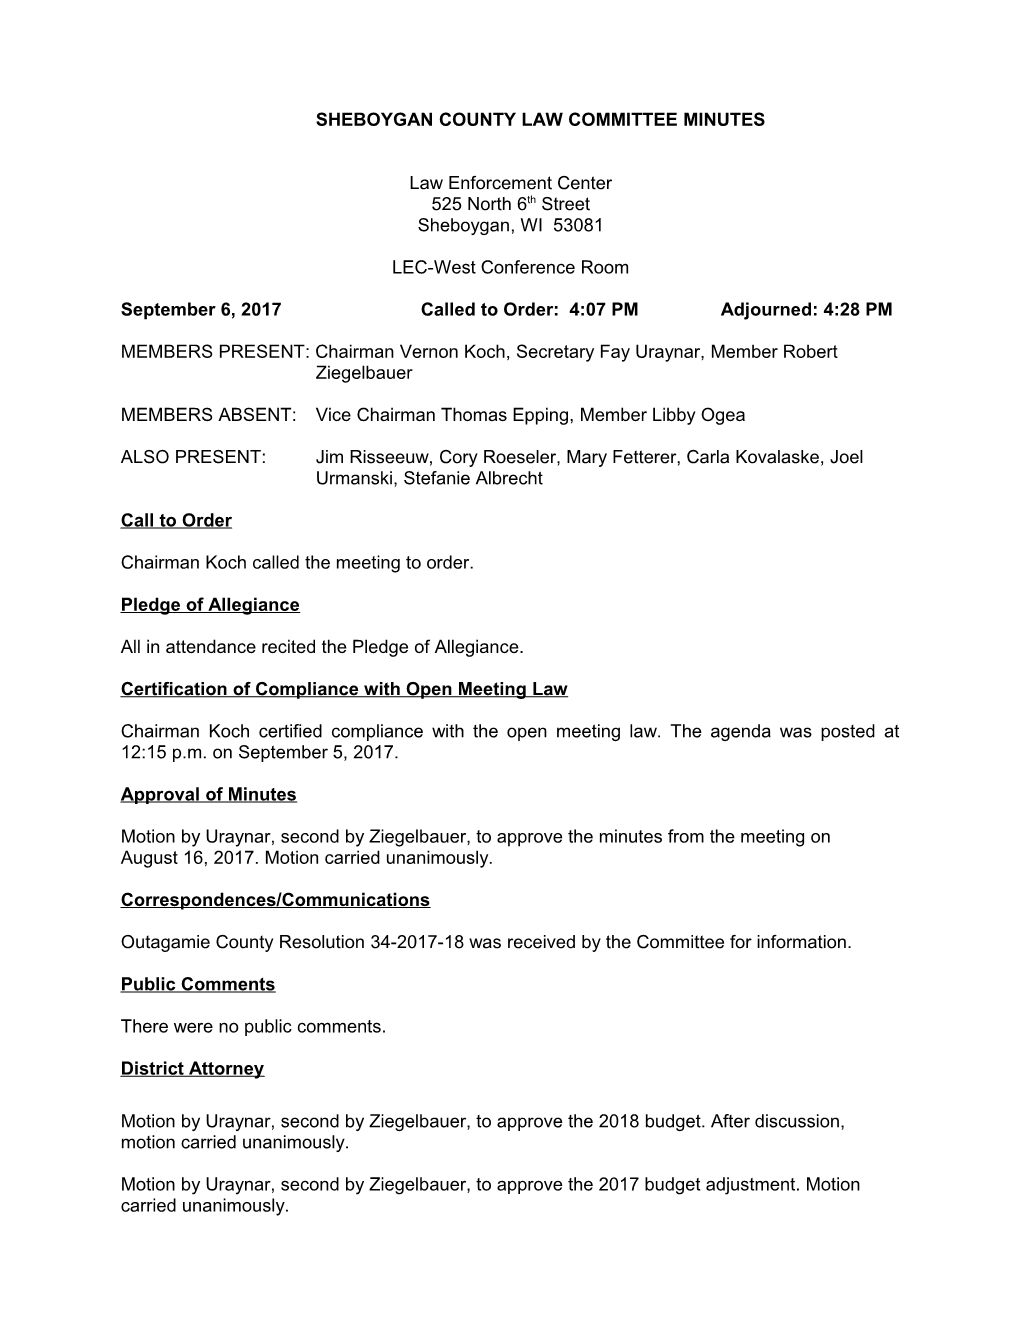 Sheboygan County Committee Minutes